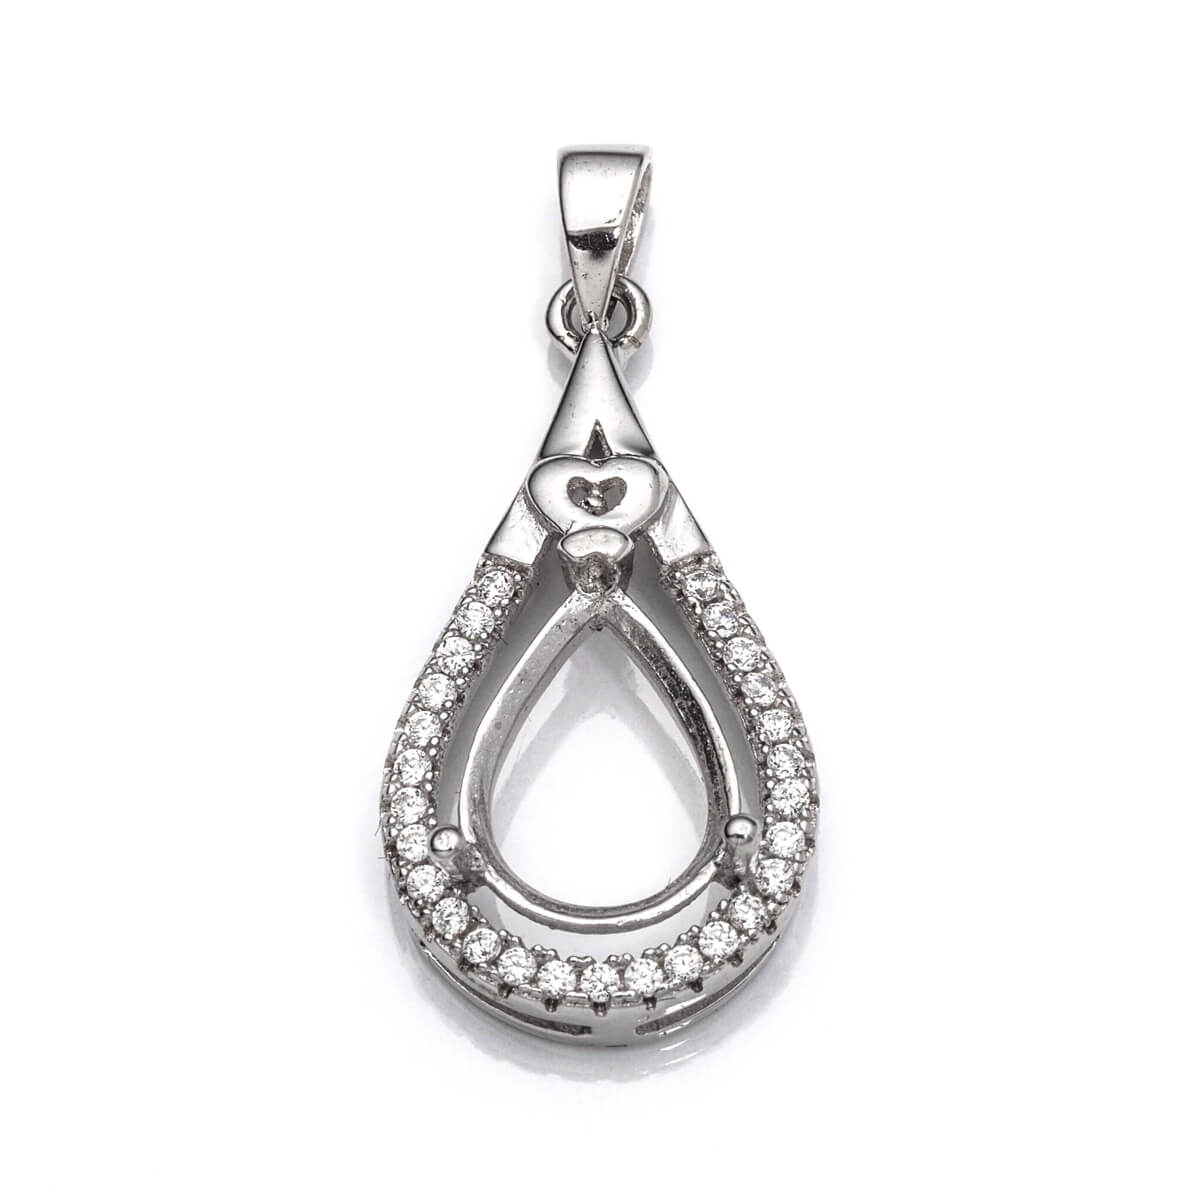 Pear Pendant with Cubic Zirconia Inlays and Pear Shape Mounting and Bail in Sterling Silver 9x11mm 